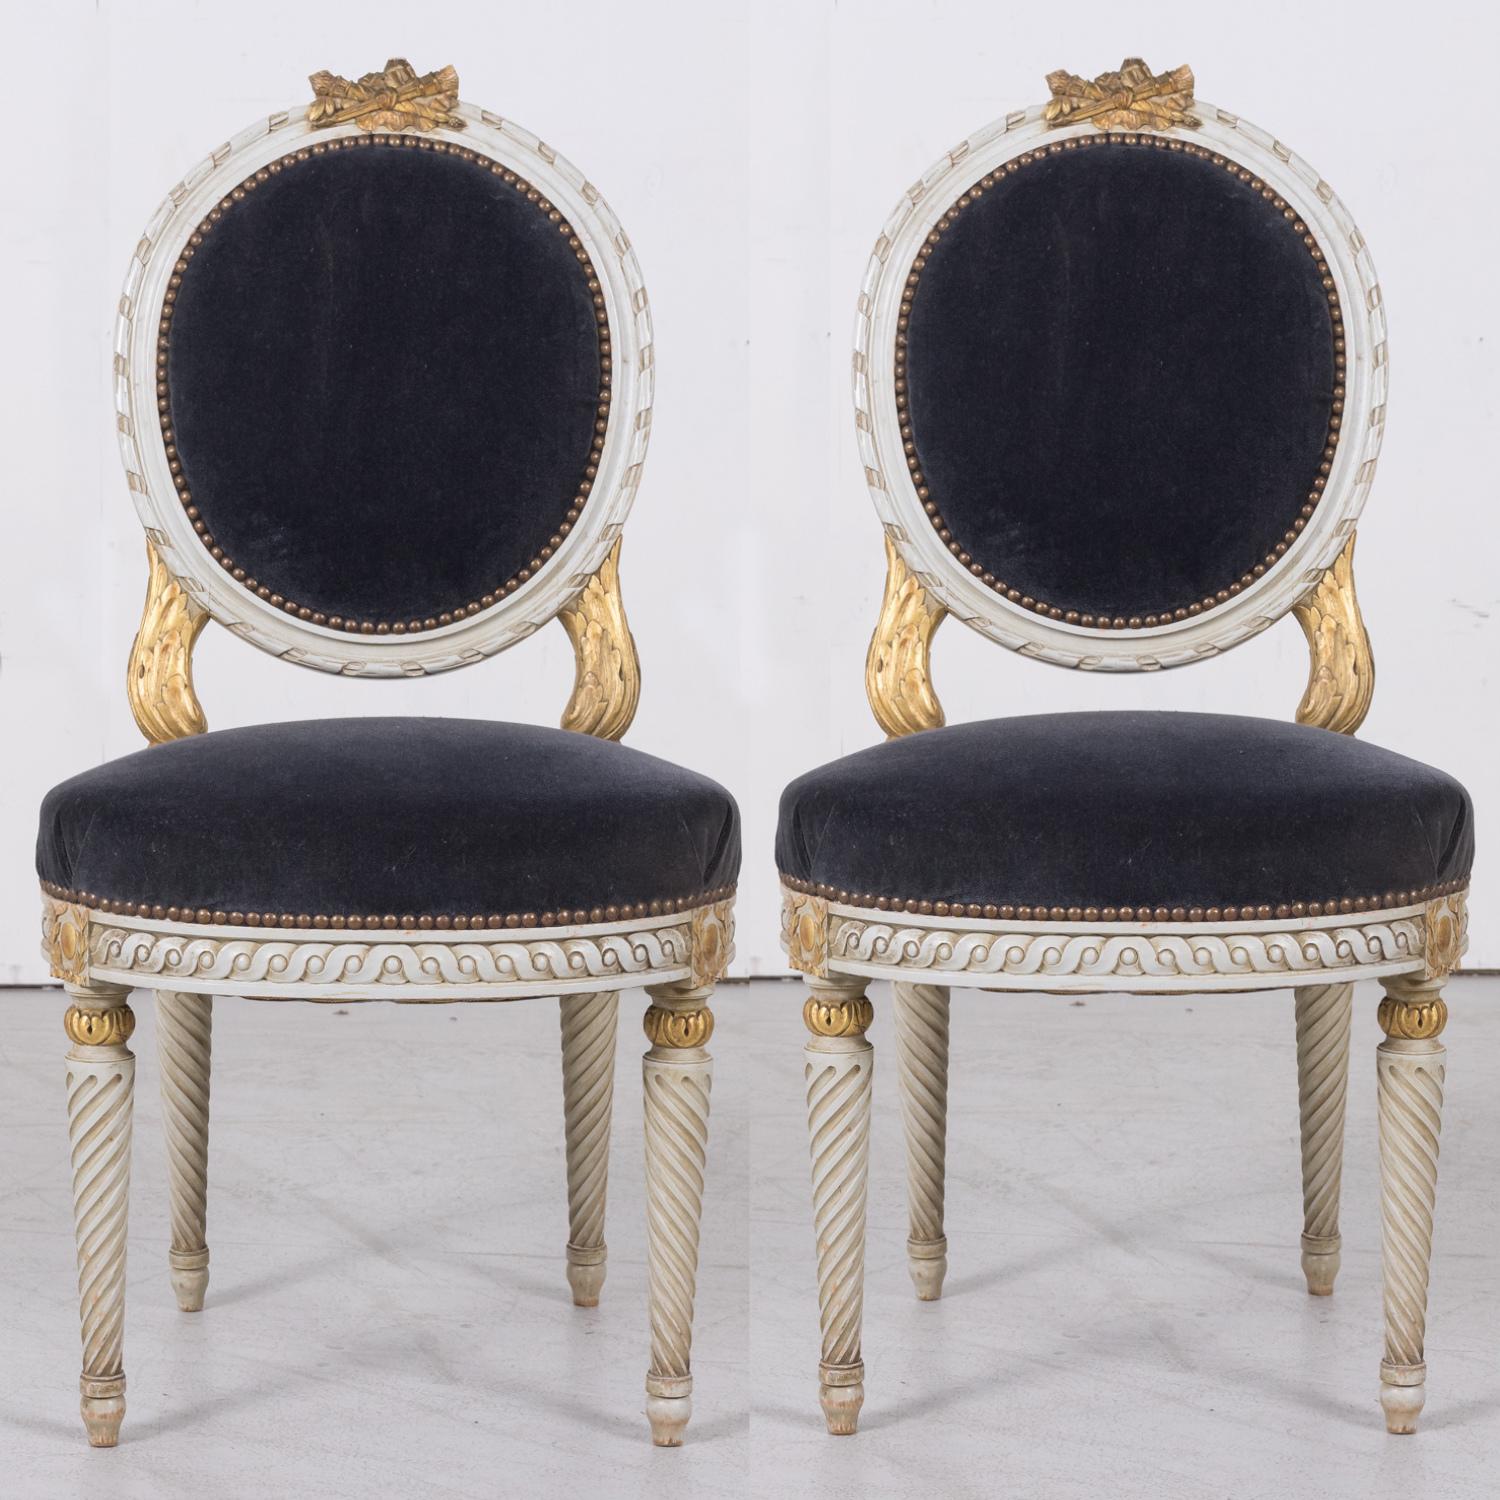 An exceptional pair of 20th century French Louis XVI style painted and parcel gilt side chairs, meticulously  handcrafted in Paris, circa 1920s. A testament to timeless elegance, these chairs  boast exquisite classical styling and unparalleled hand